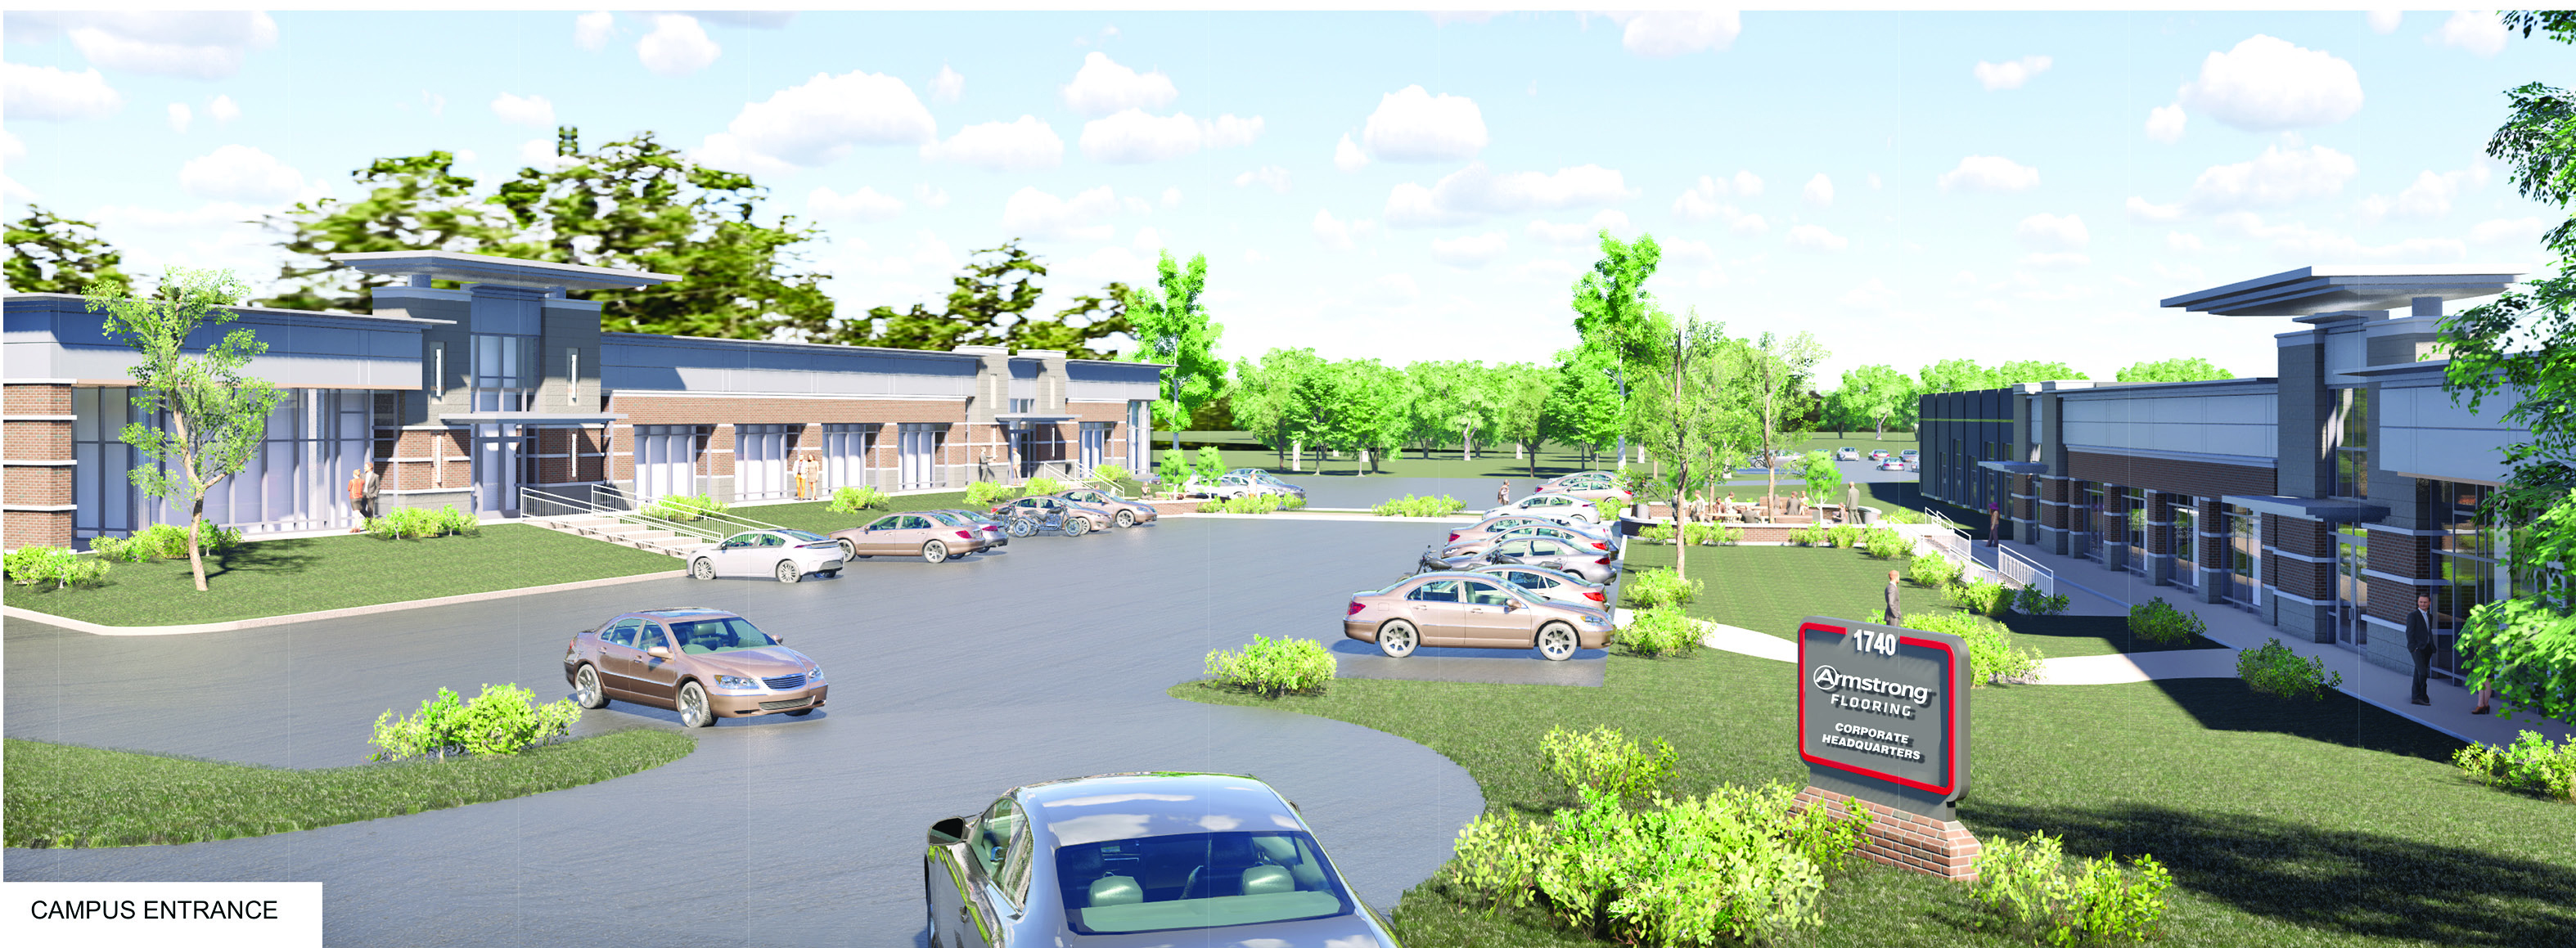 Rendering of campus entrance to Armstrong Flooring, Inc.'s new corporate headquarters at Greenfield, Lancaster, Pa., a project of High Real Estate Group LLC.  